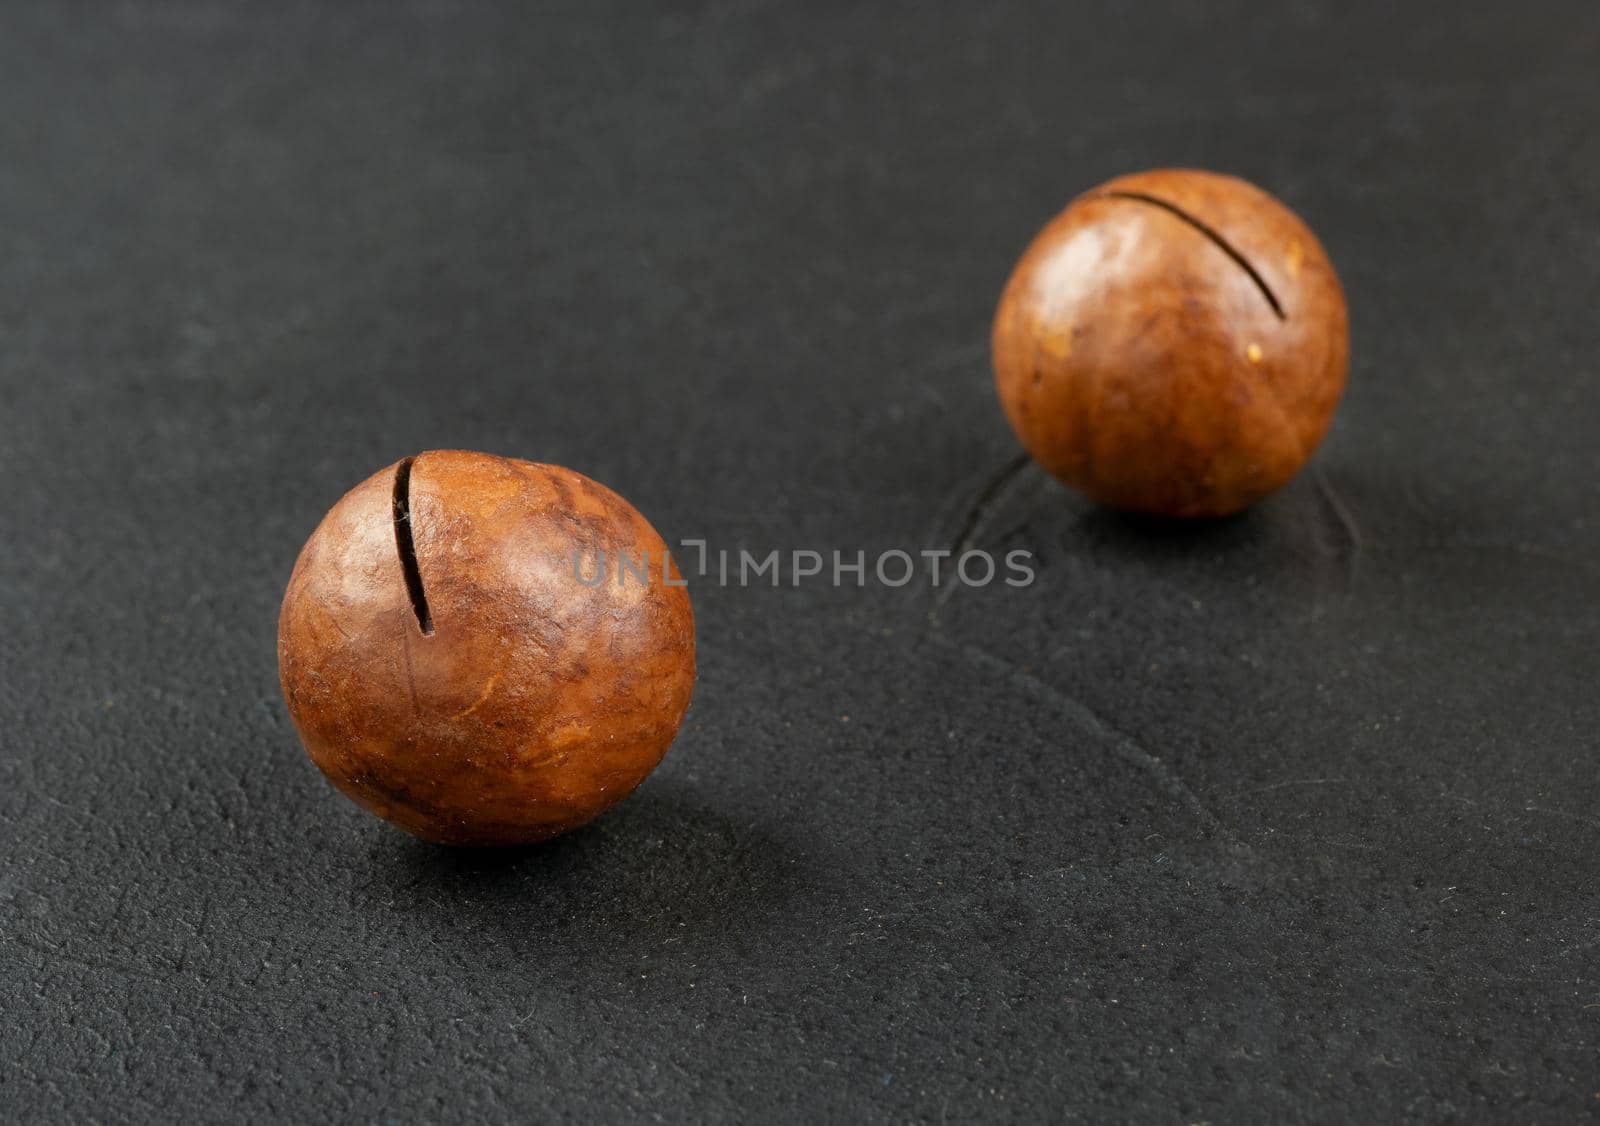 Two macadamia nuts by andregric